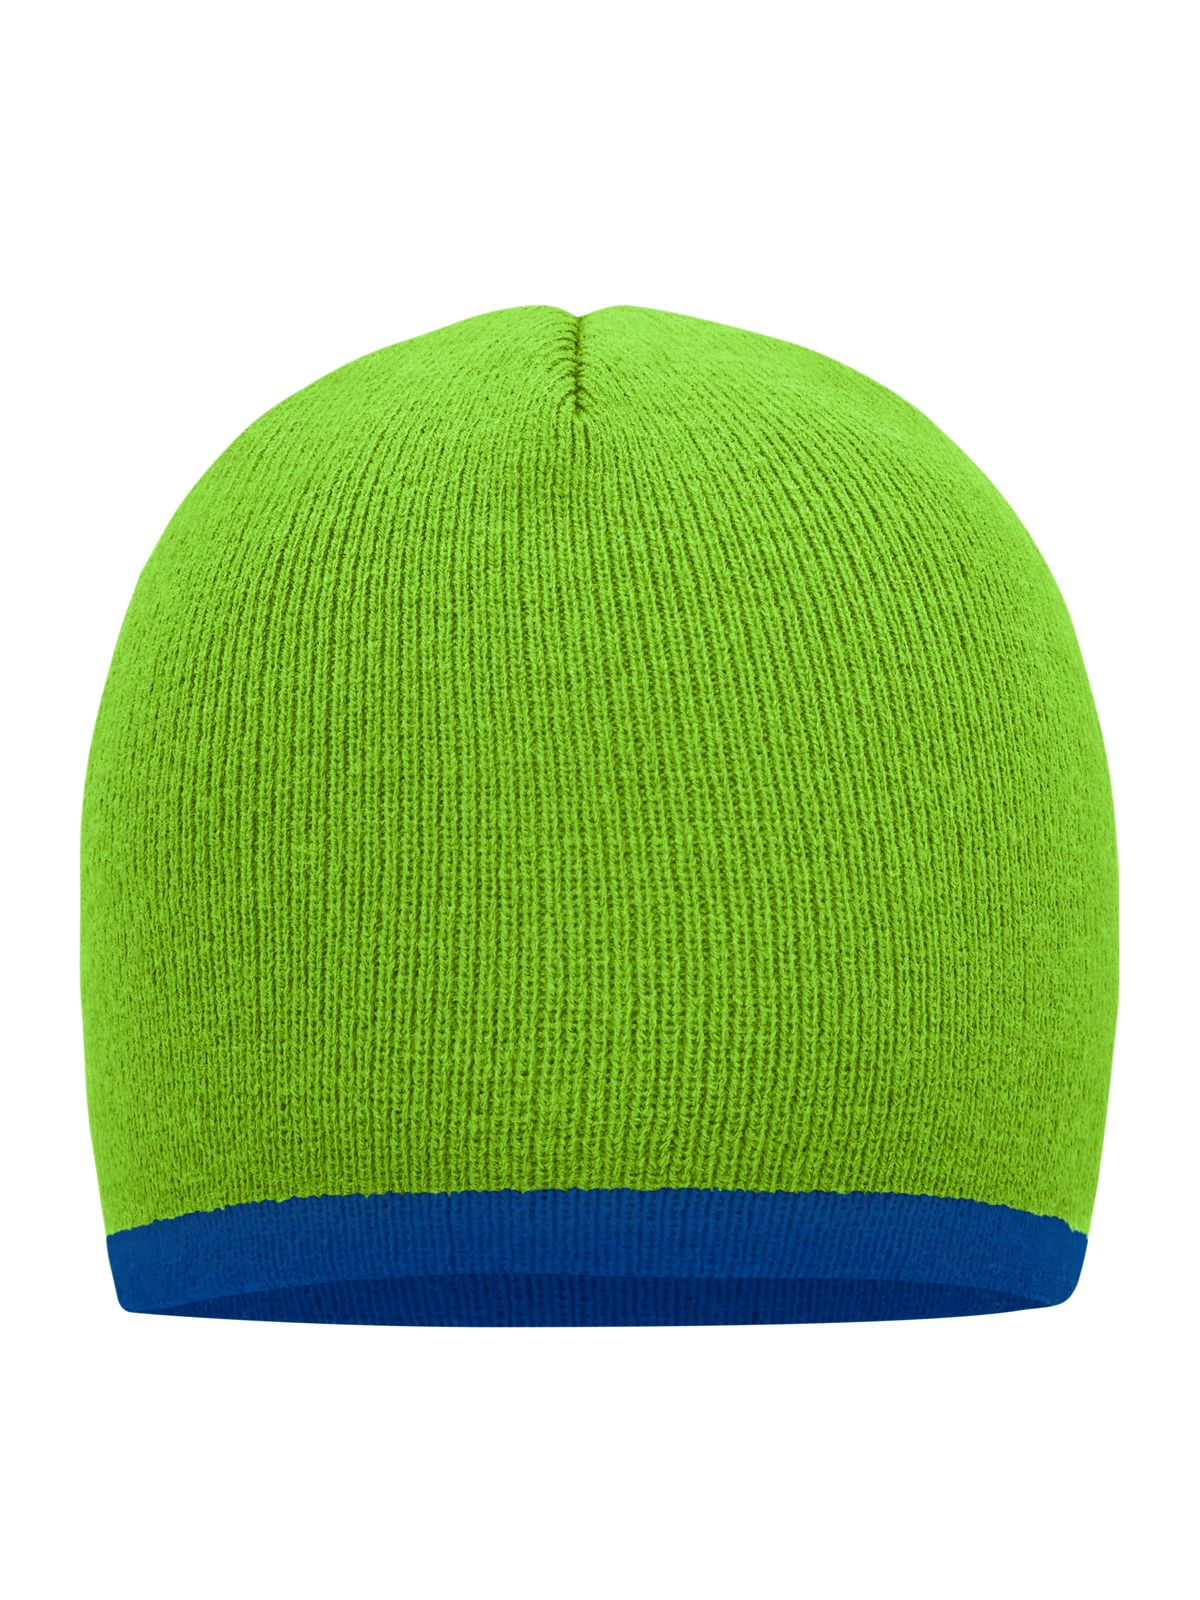 beanie-with-contrasting-border-lime-green-royal.webp